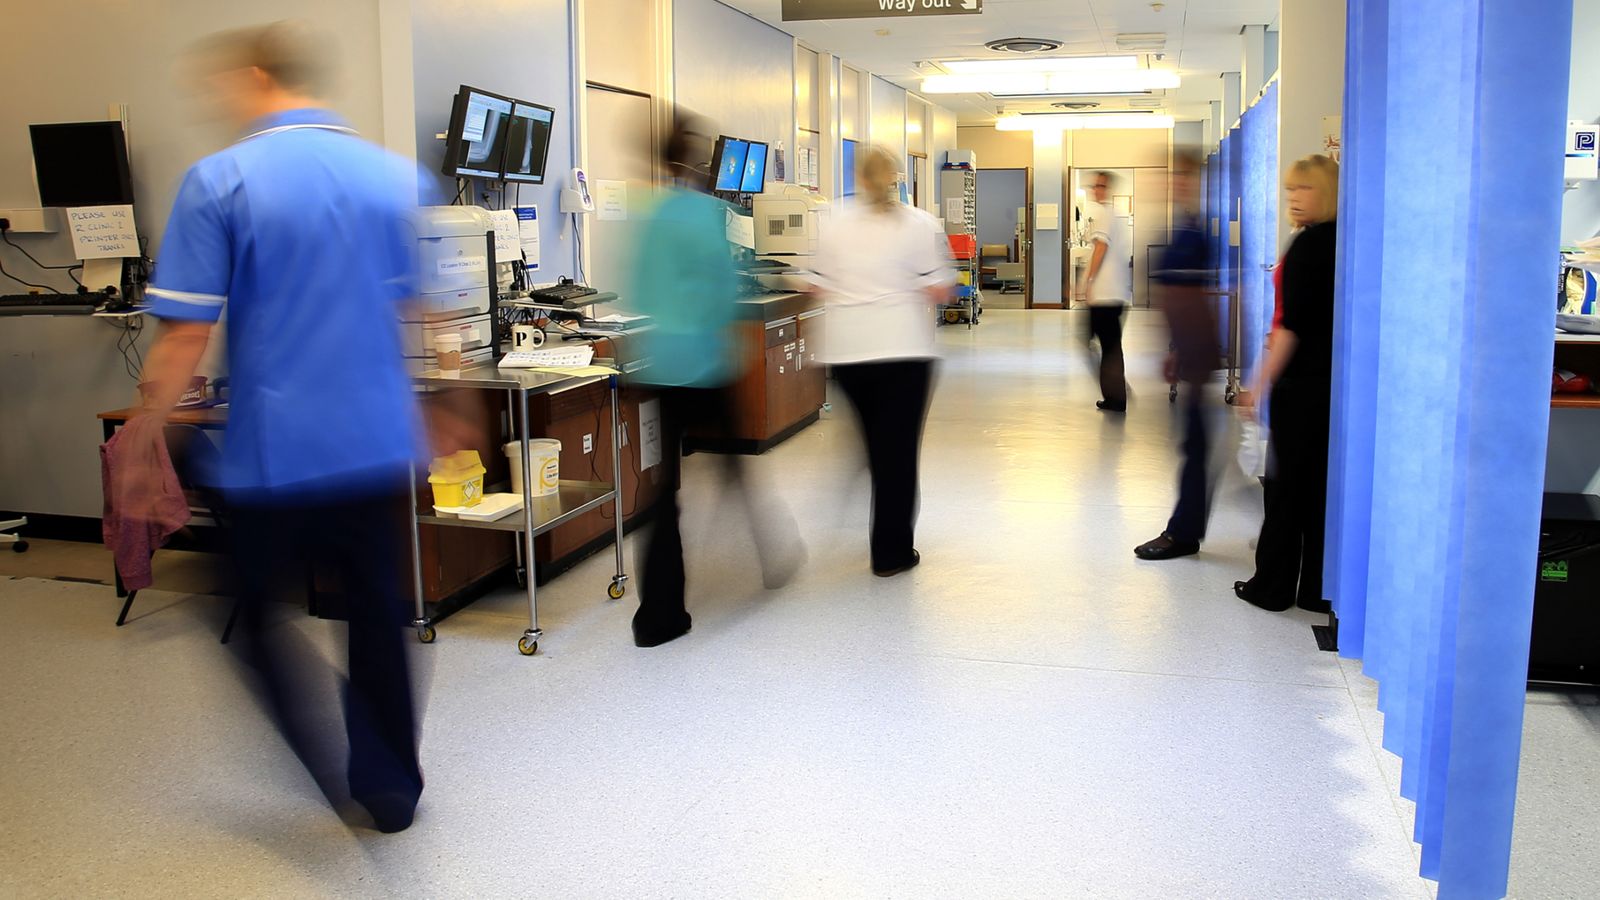 Thousands of NHS contractors face missing out on pay rise - despite working on same terms